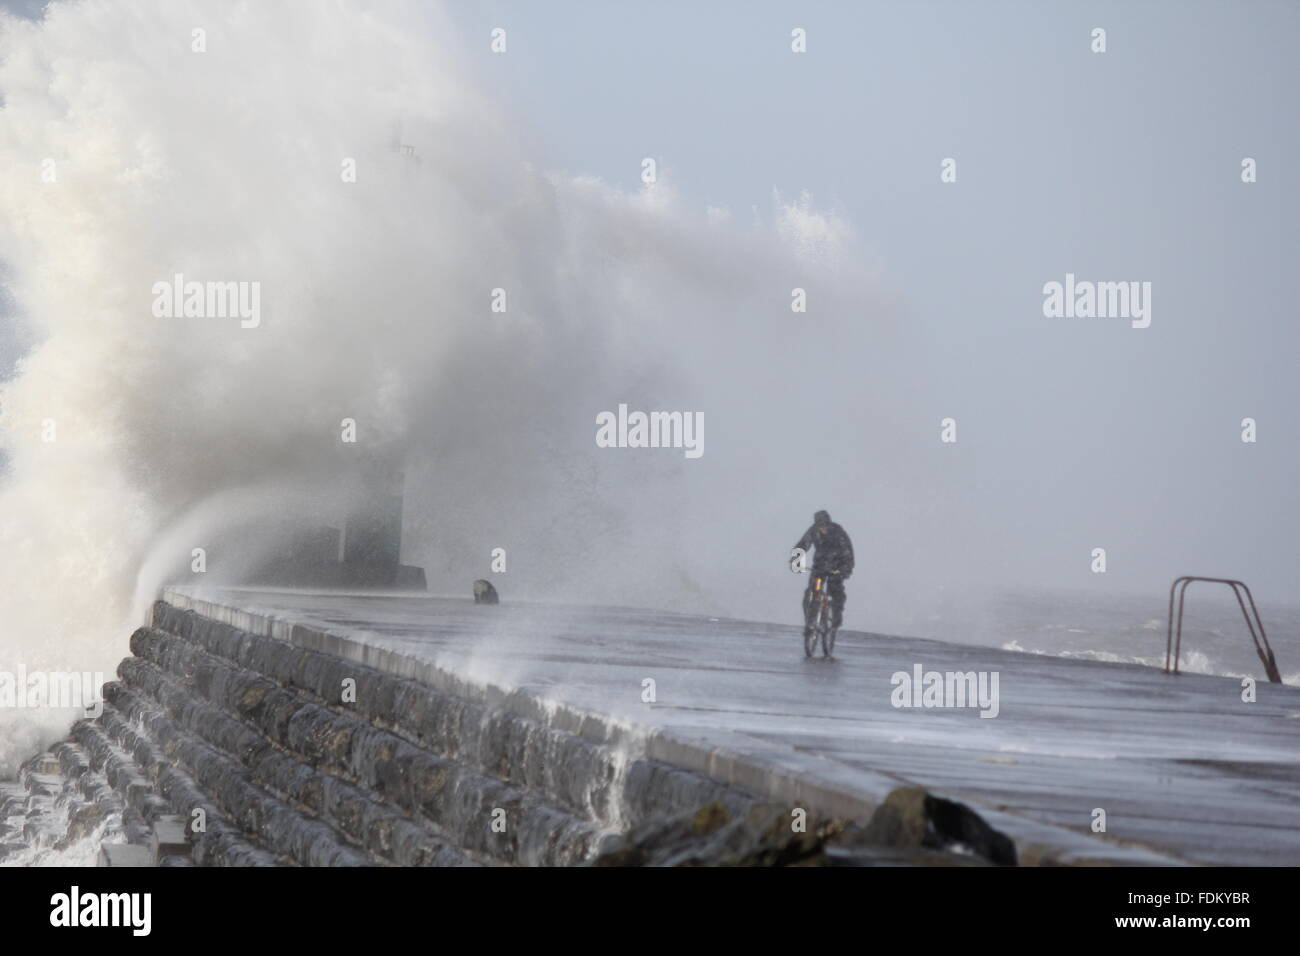 Aberystwyth Wales UK, 2016, a dare devil cyclist pits himself against huge waves driven by gale force winds during winter storms Stock Photo